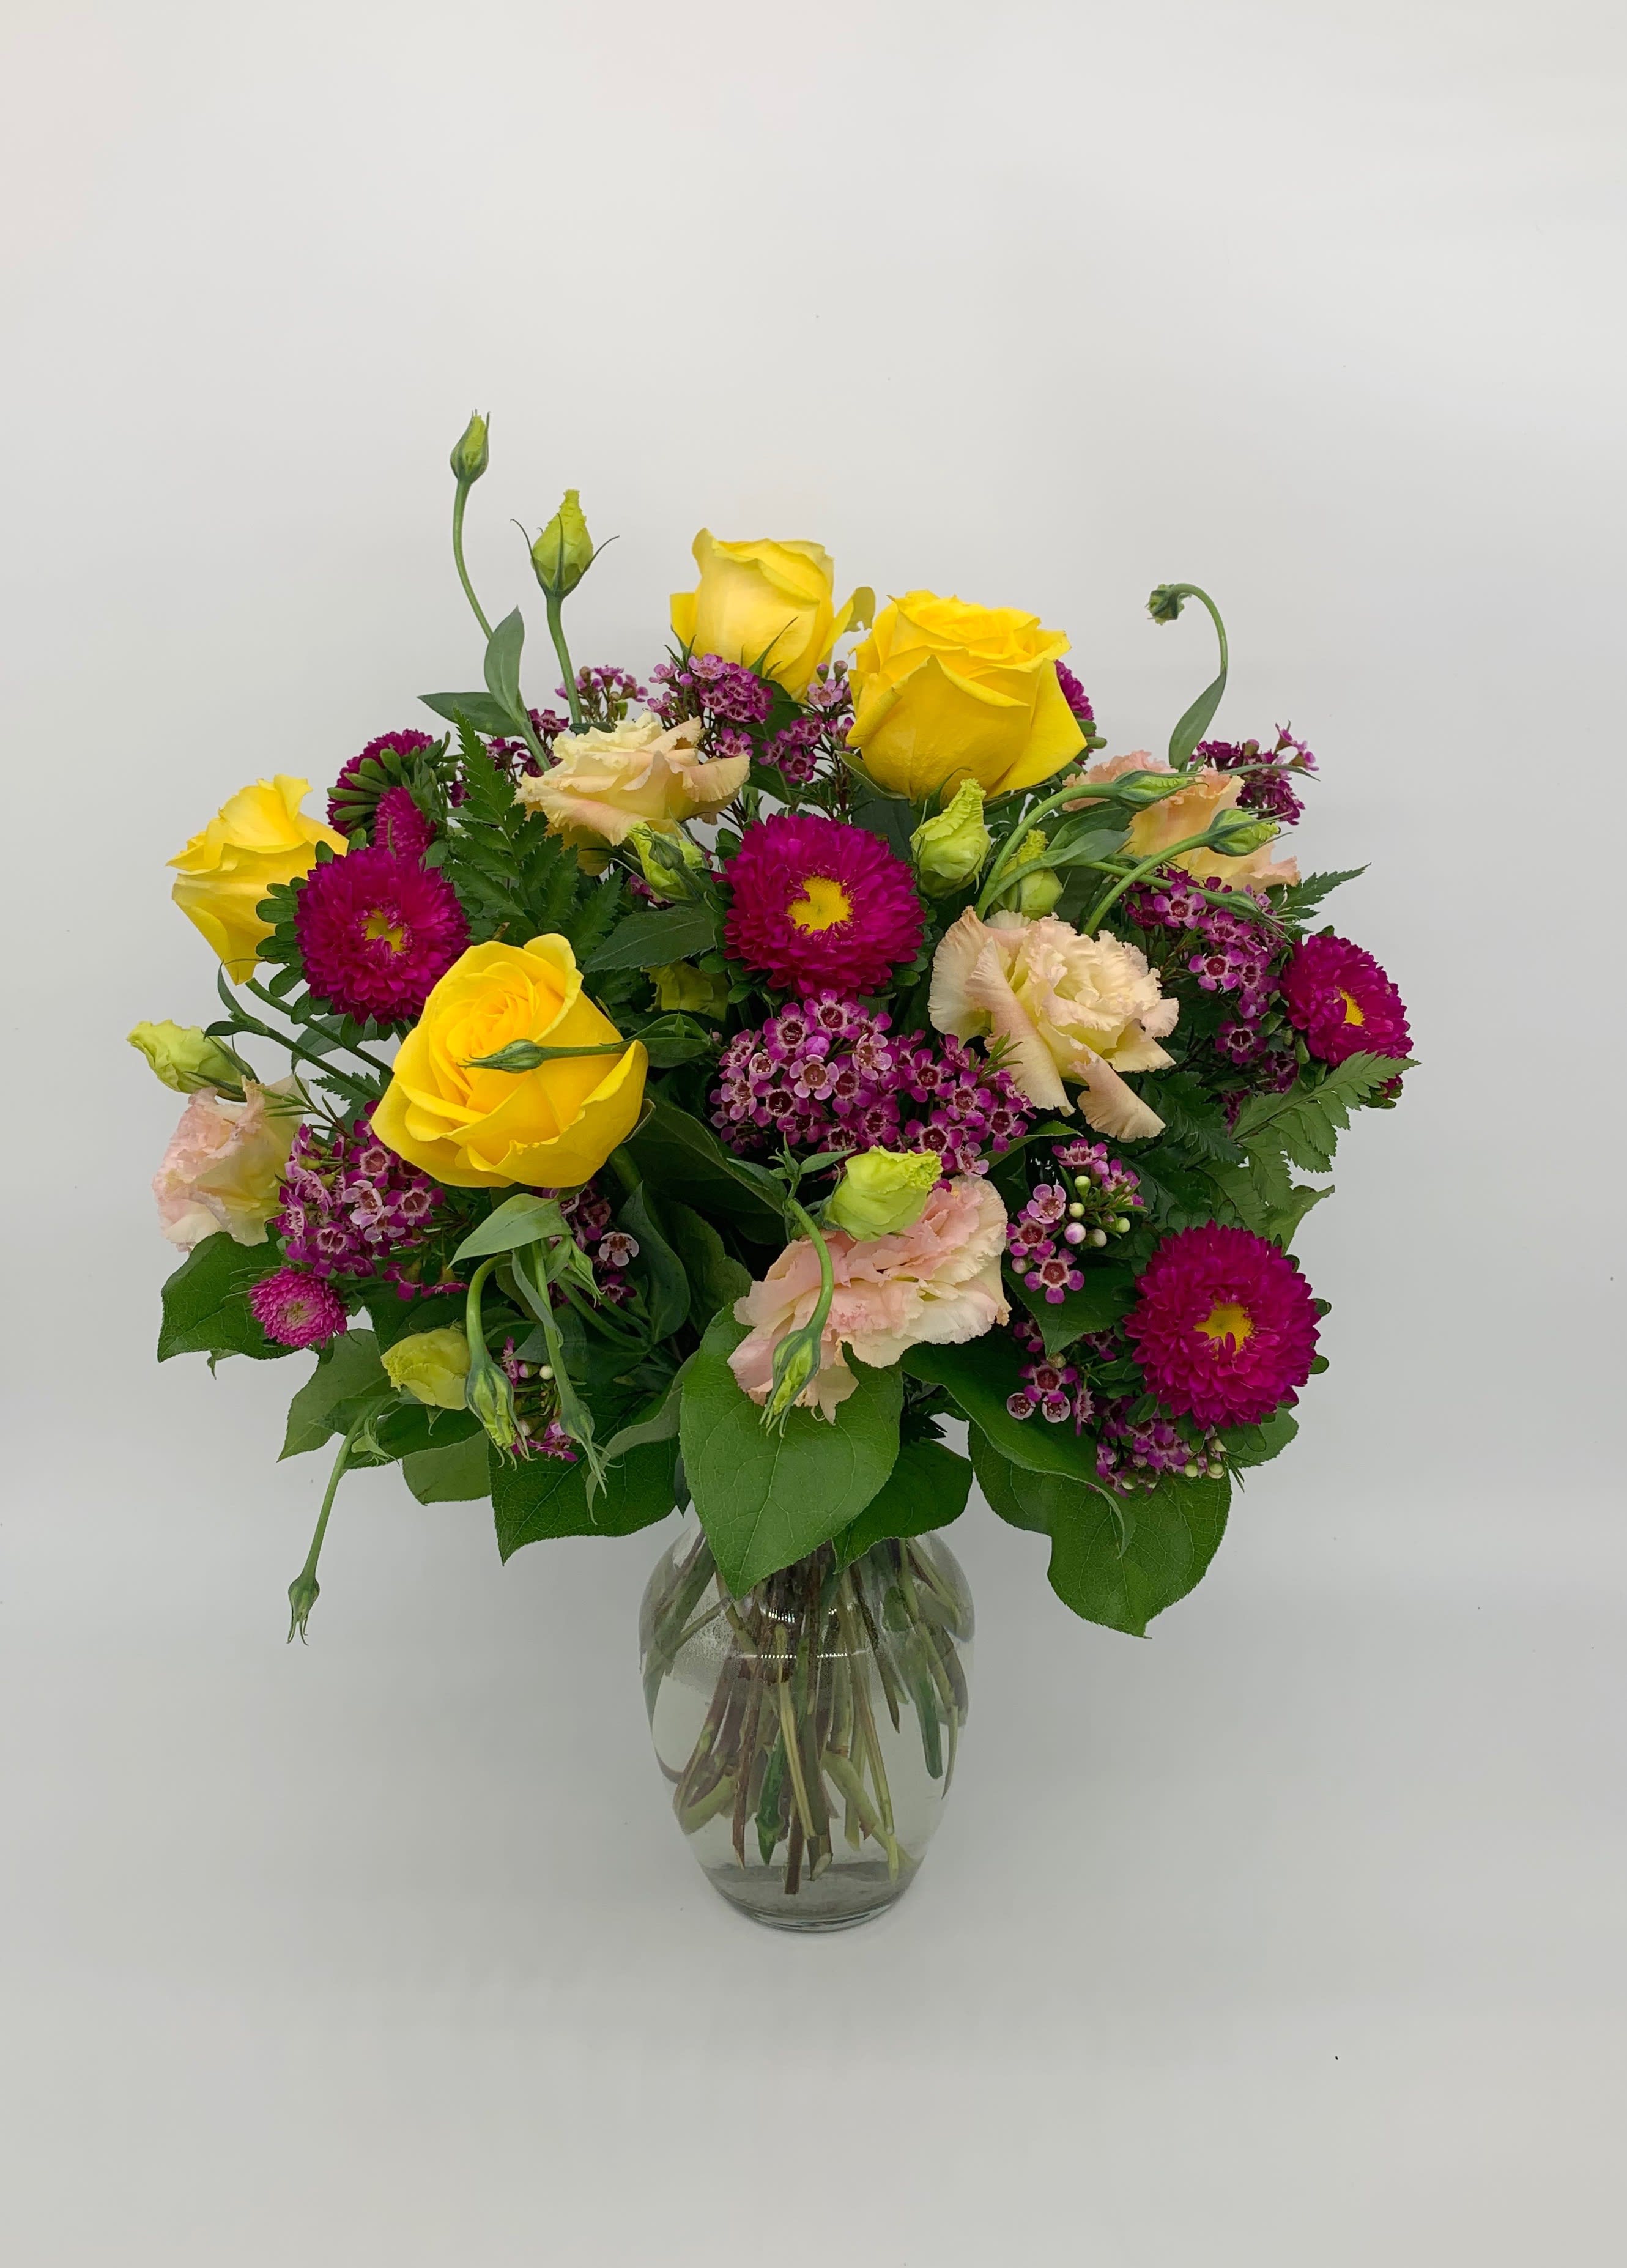 LF126 - Georgie Girl - A lovely arrangement with yellow roses accented with other seasonal flowers.